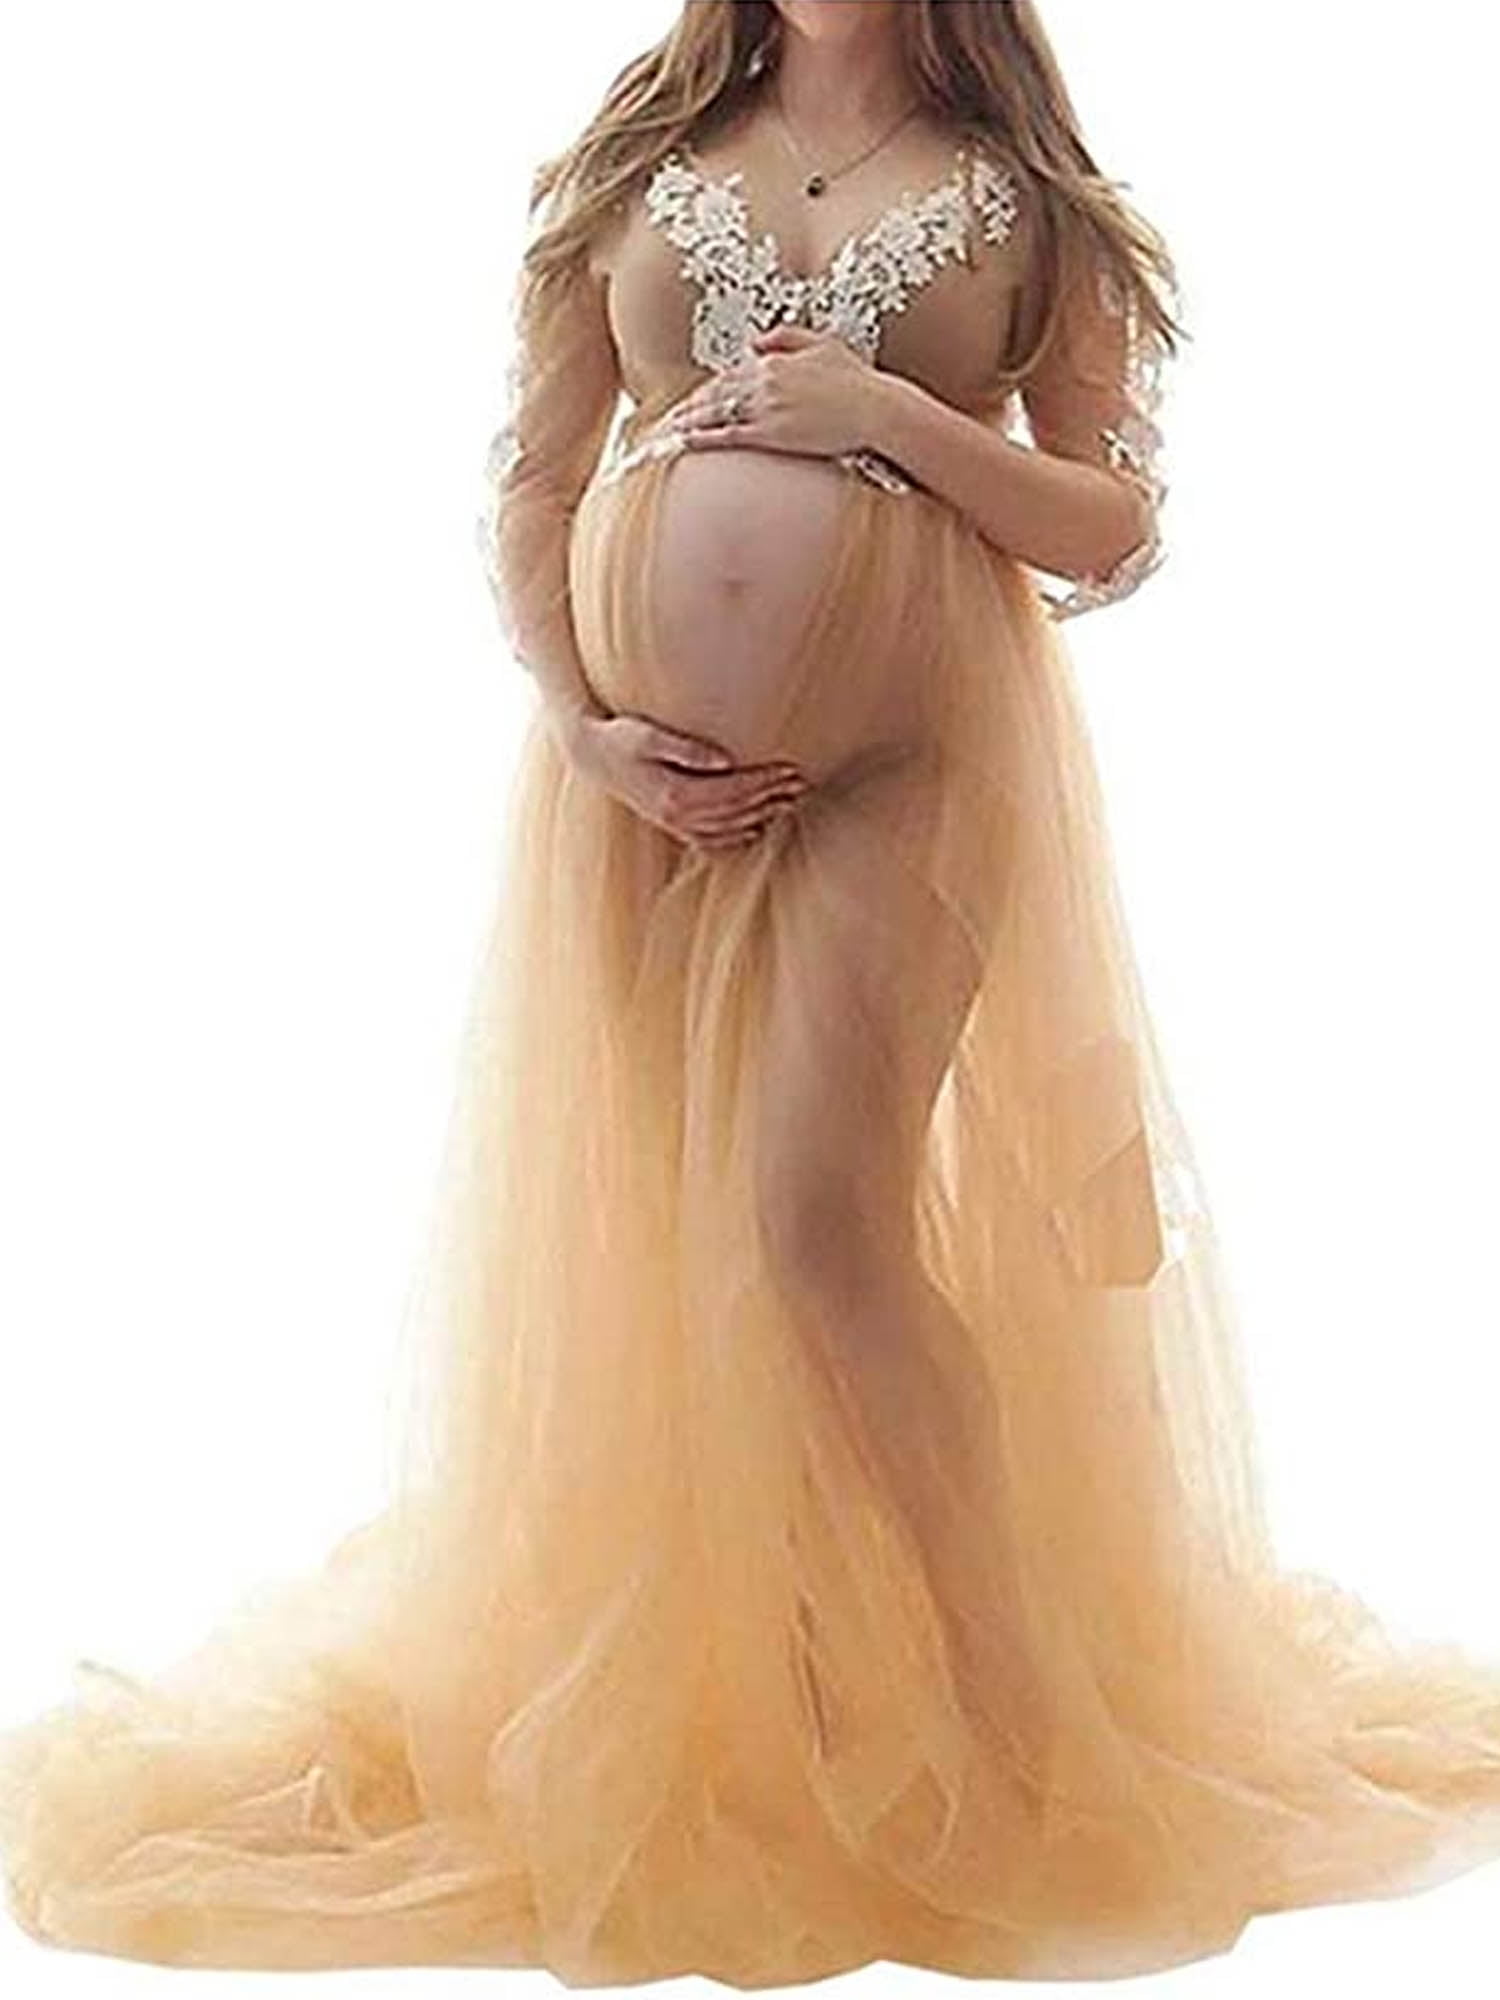 Maternity Dress for Photoshoot Lace Pregnant Dress Maxi Gown Photography Photo Shoot Dress 5c2dd6fe 5298 4a51 8f22 ce6f4bde3d2c.01d73f583a94faa8cb0877fa6e63ff56